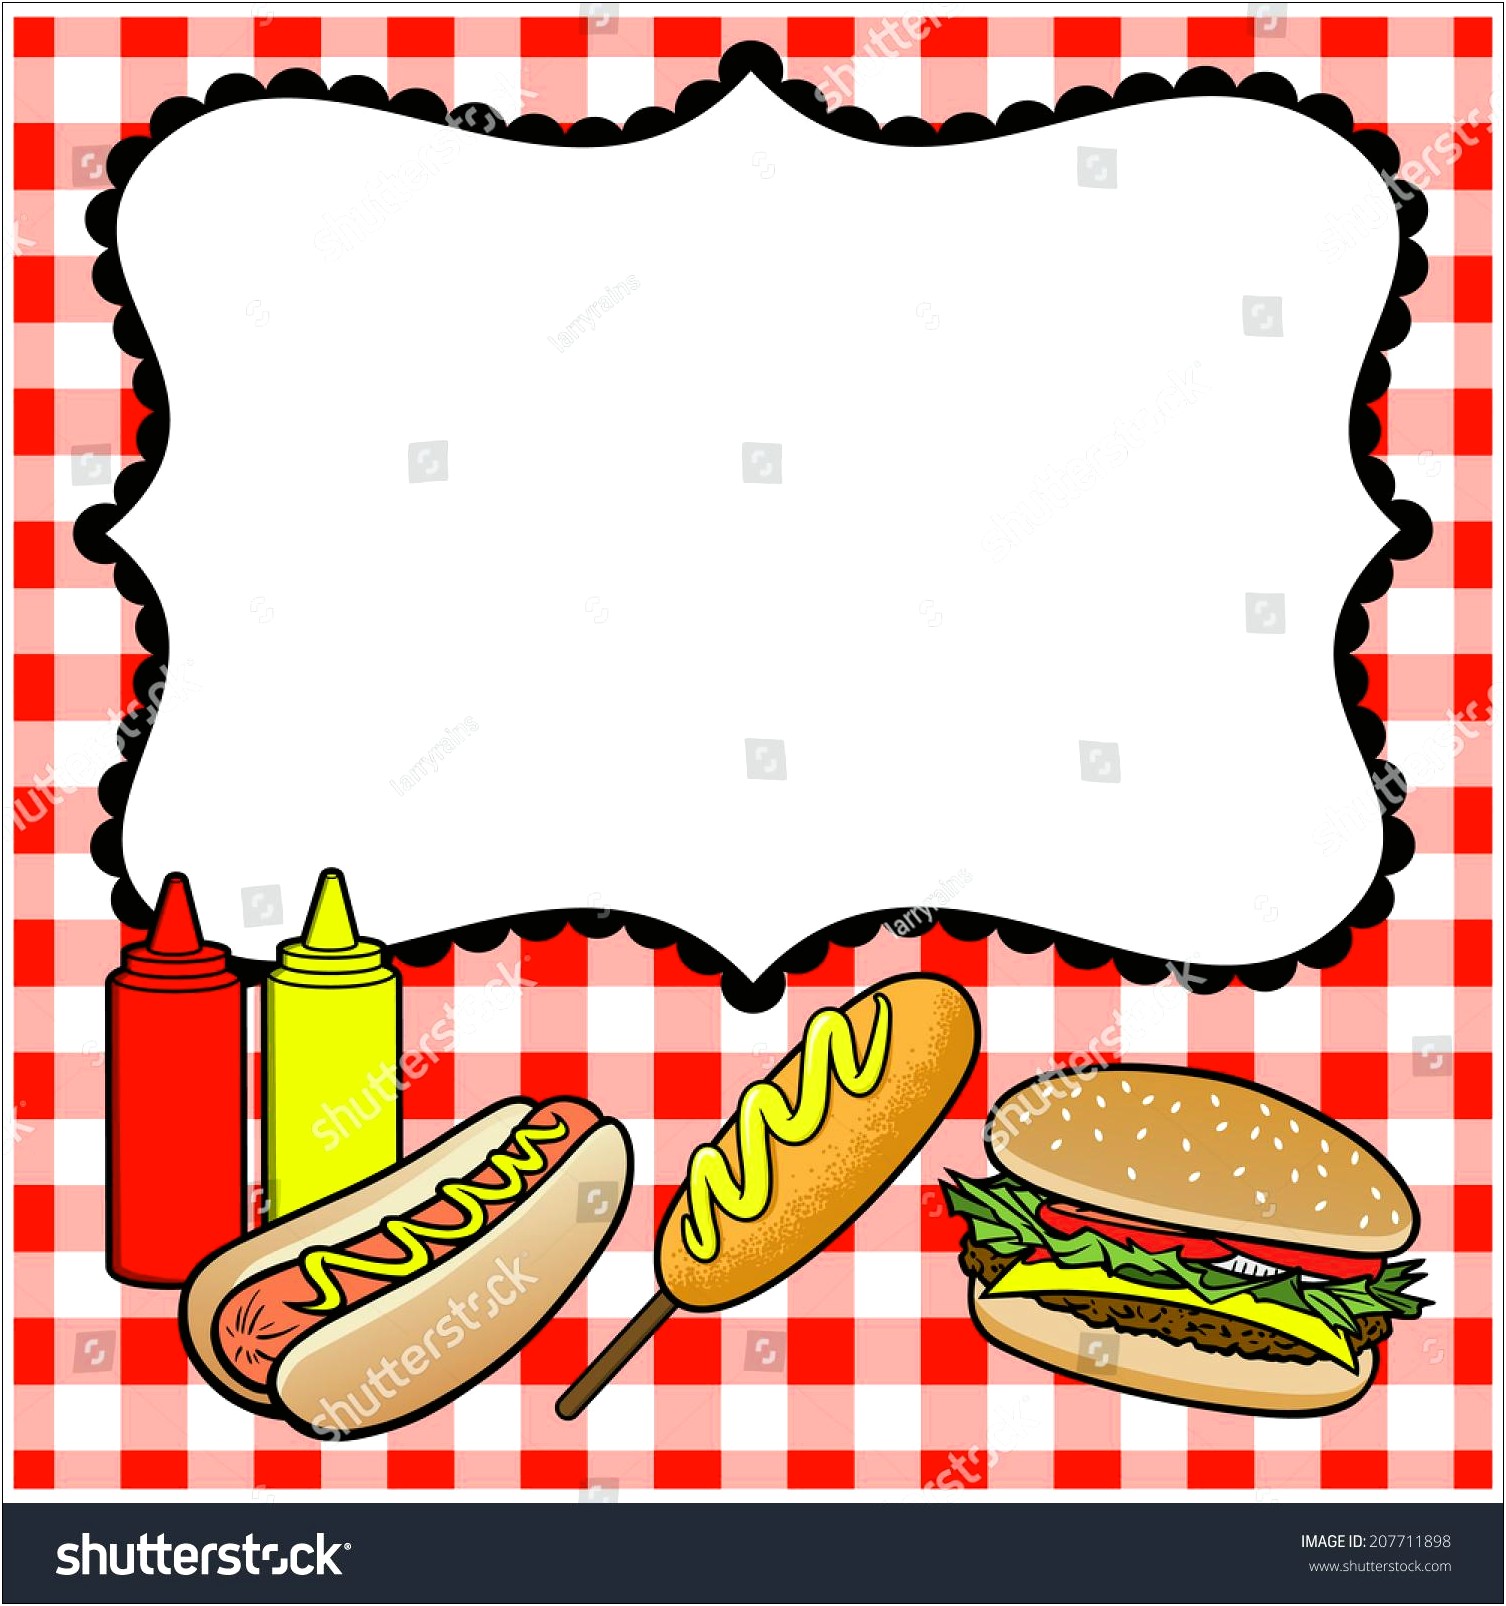 Free Concession Stand Menu Template Word